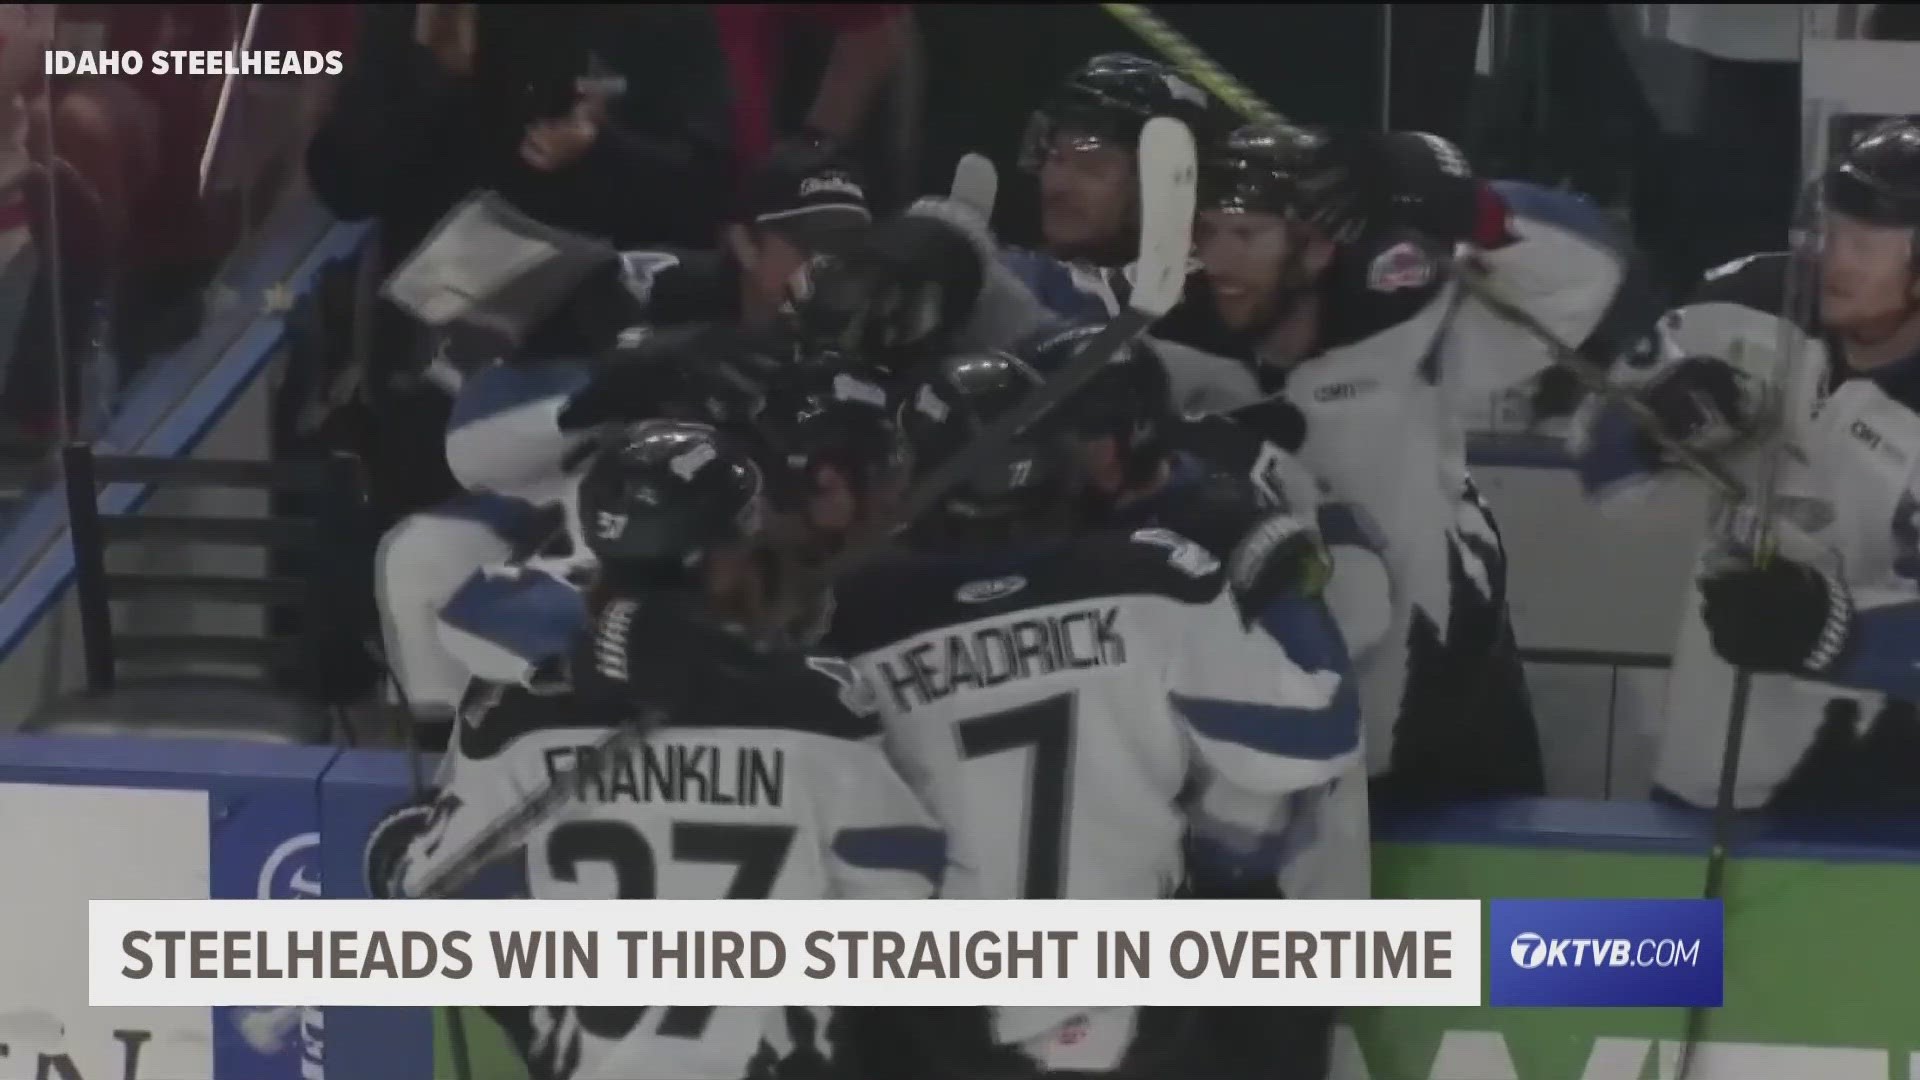 Idaho Steelheads are looking to advance to second round of the ECHL playoffs, and keep their Kelly Cup hopes alive, as the series returns to Boise.